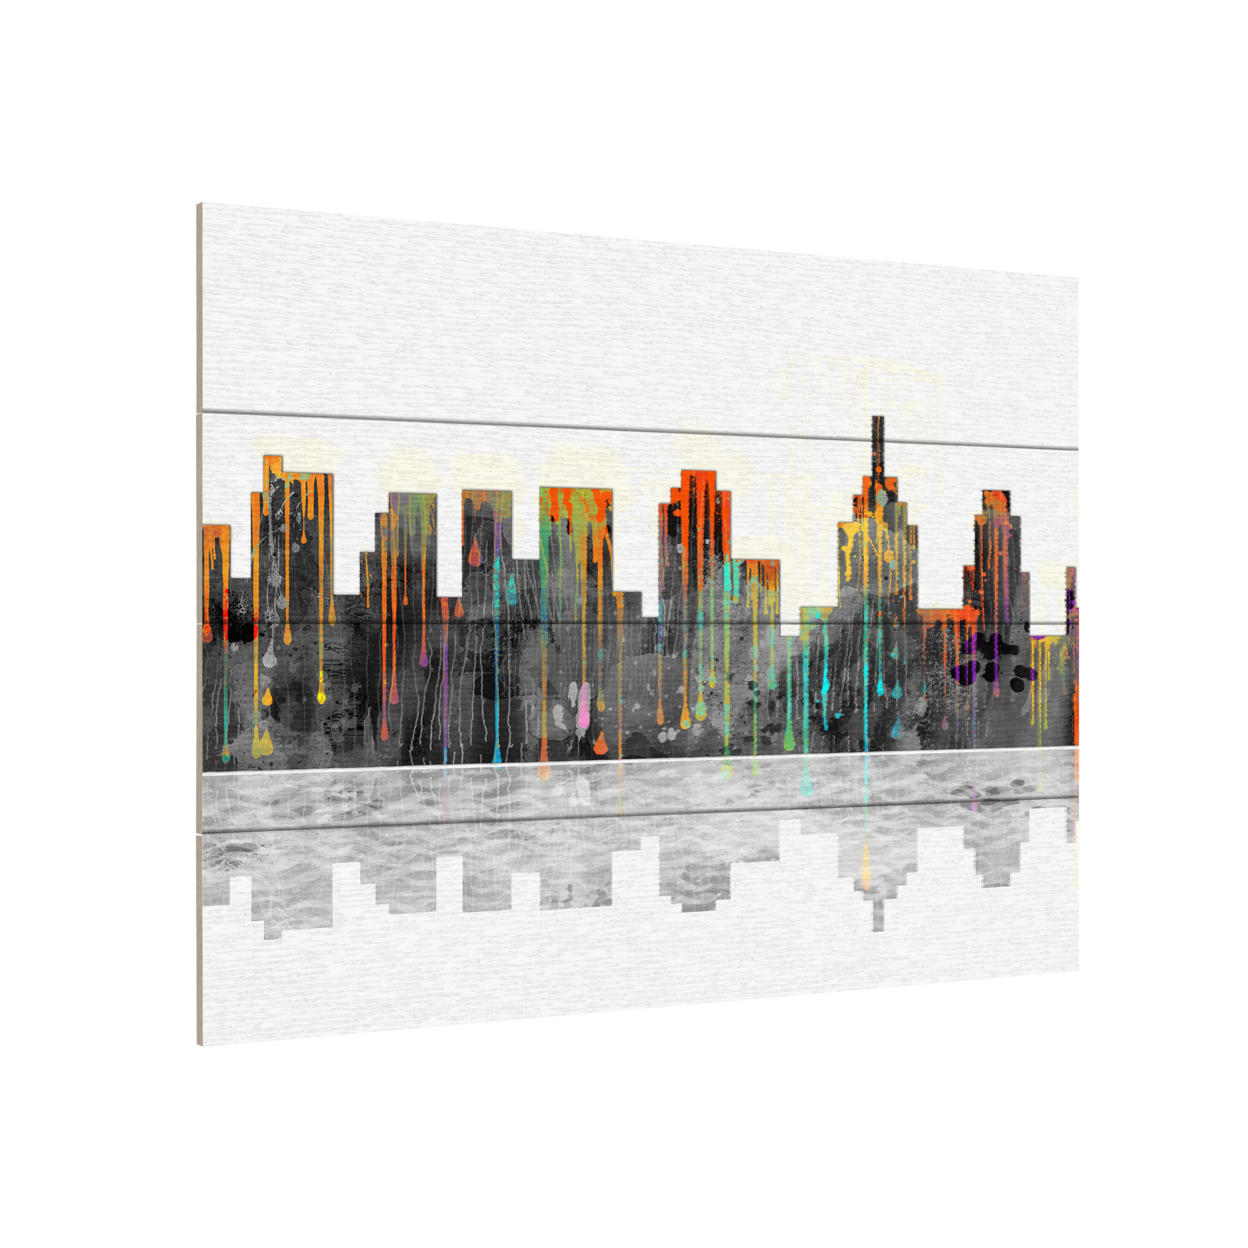 Wall Art 12 X 16 Inches Titled Philadelphia Pennsylvania Skyline Ready To Hang Printed On Wooden Planks